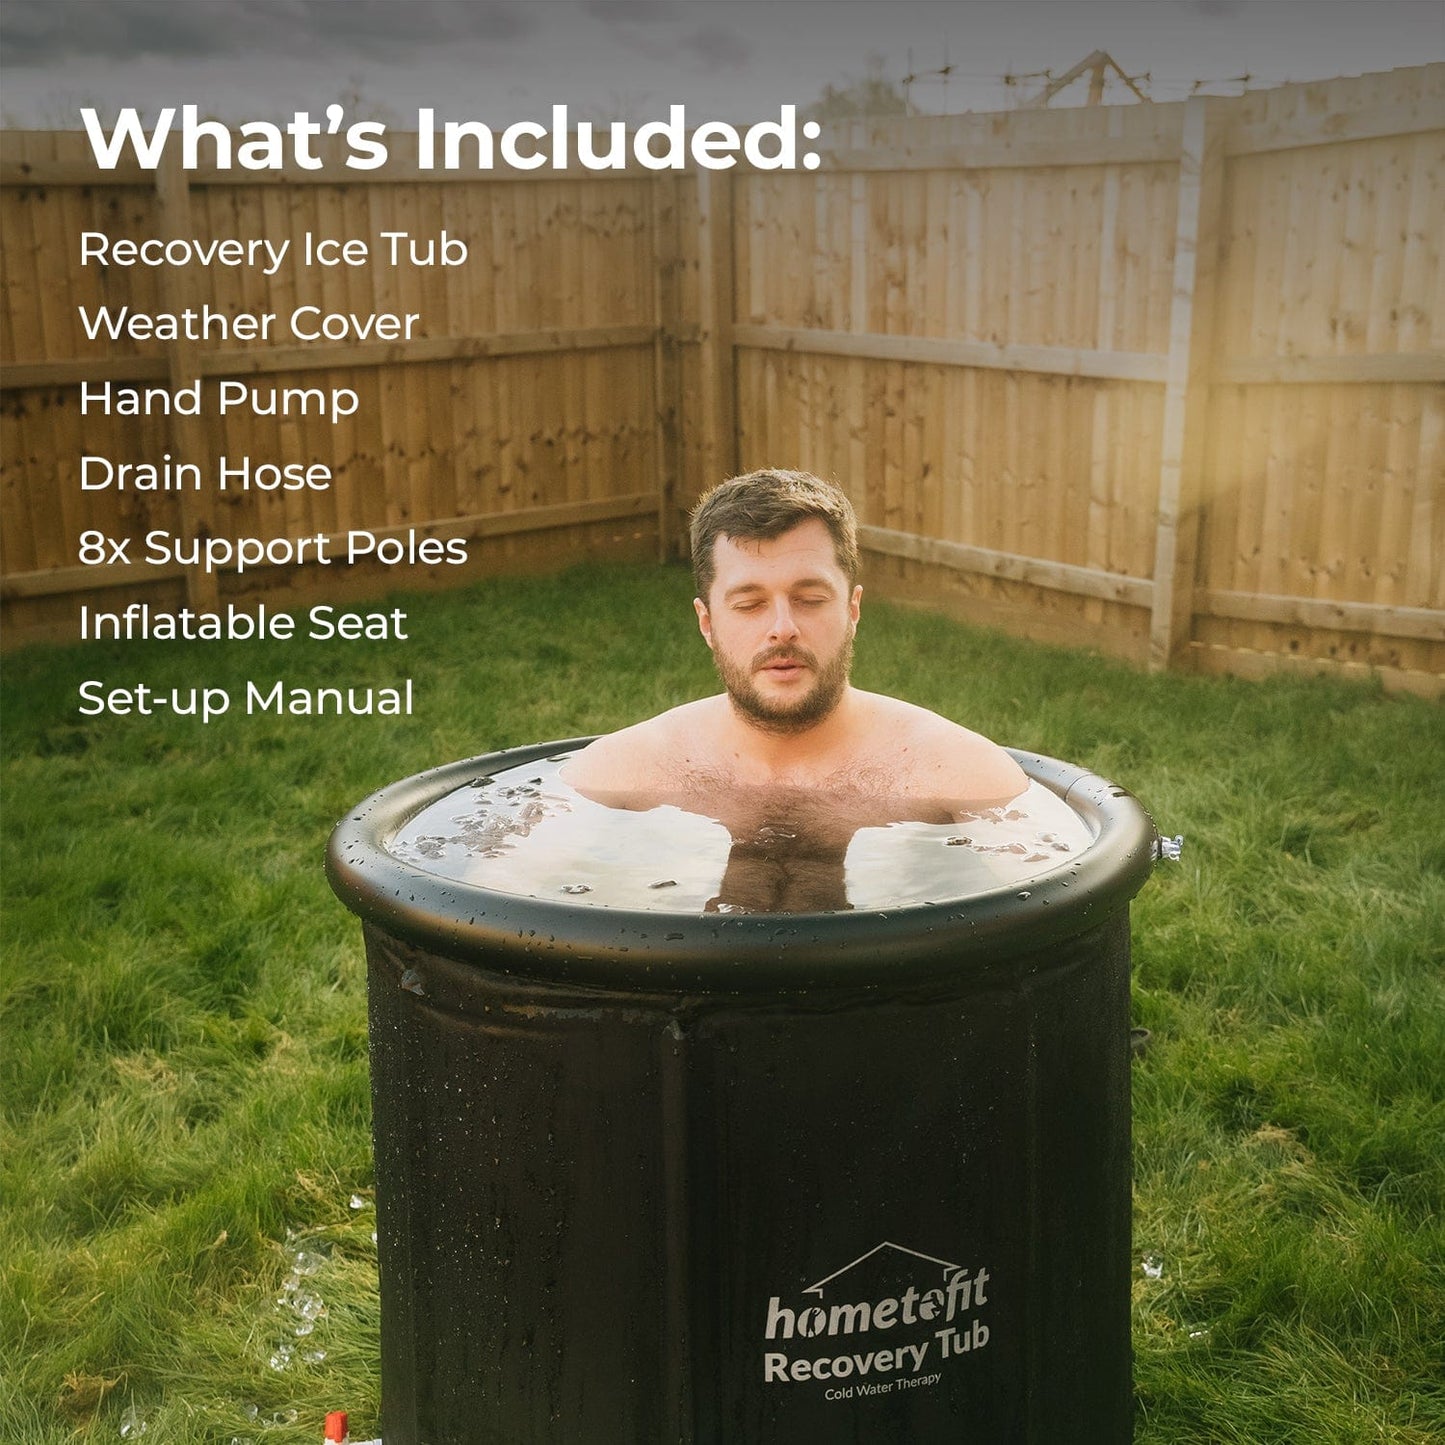 HomeToFit Recovery Ice Tub